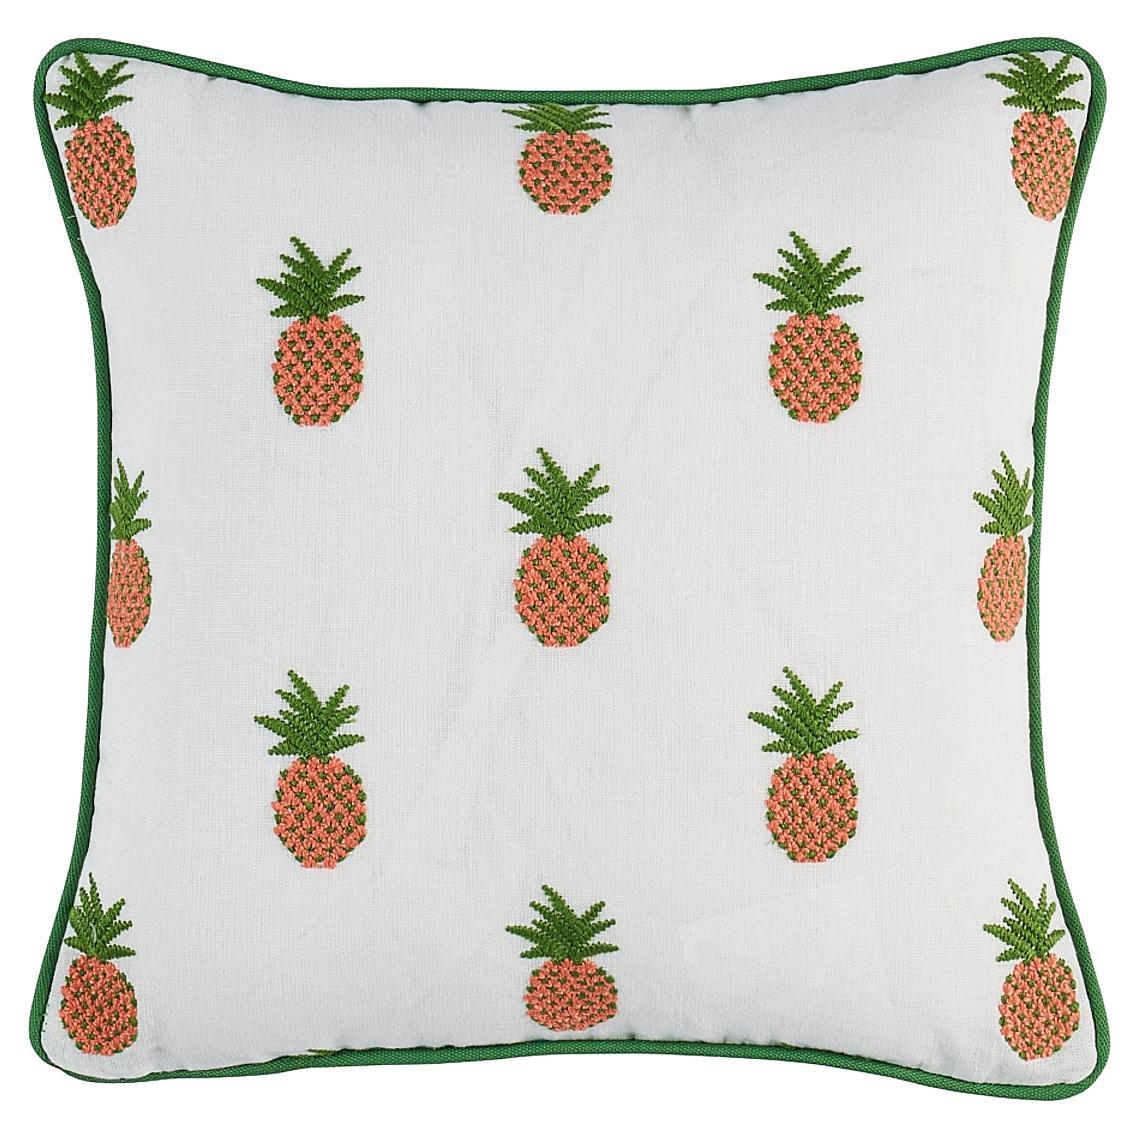 Schumacher Pineapple Embroidery 14" Pillow in Apricot/Ivory For Sale